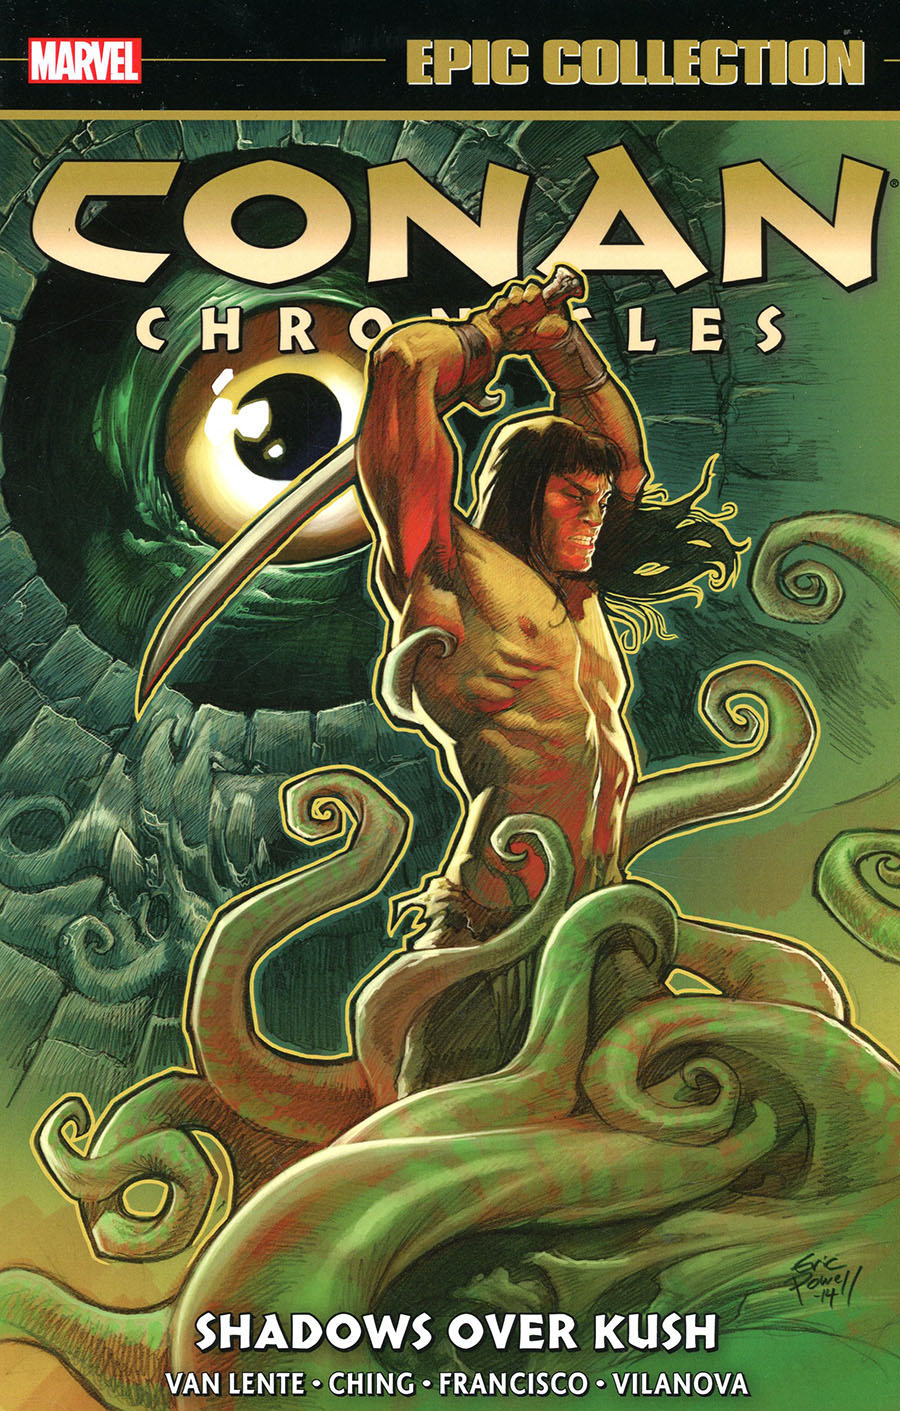 Conan Chronicles Epic Collection Vol 7 Shadows Over Kush TP